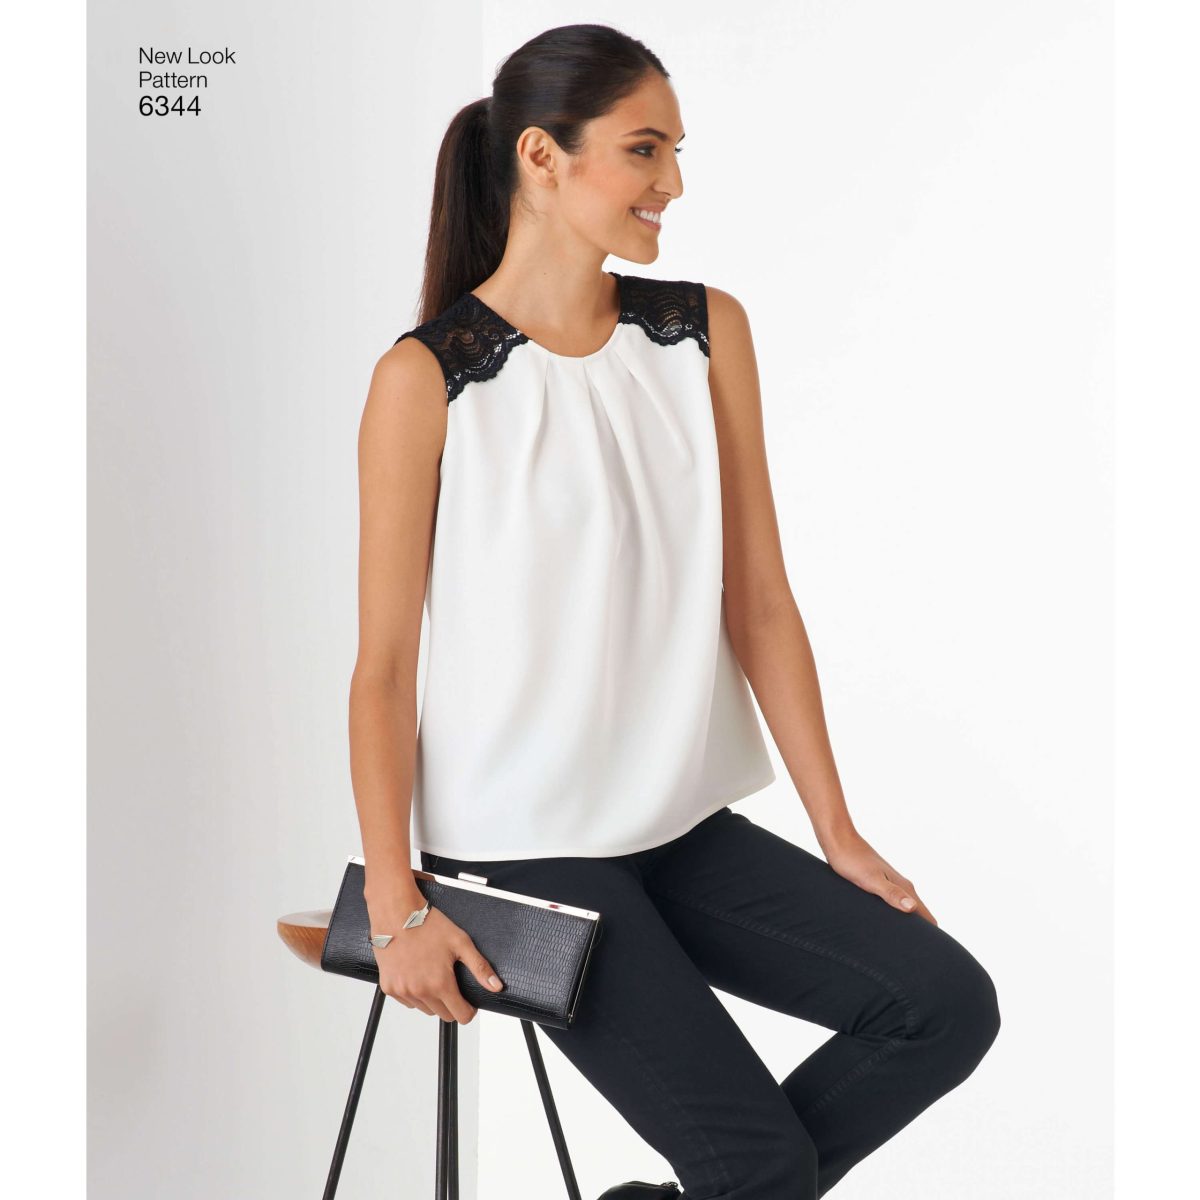 New Look Sewing Pattern N6344 Misses' Tops in Two Lengths